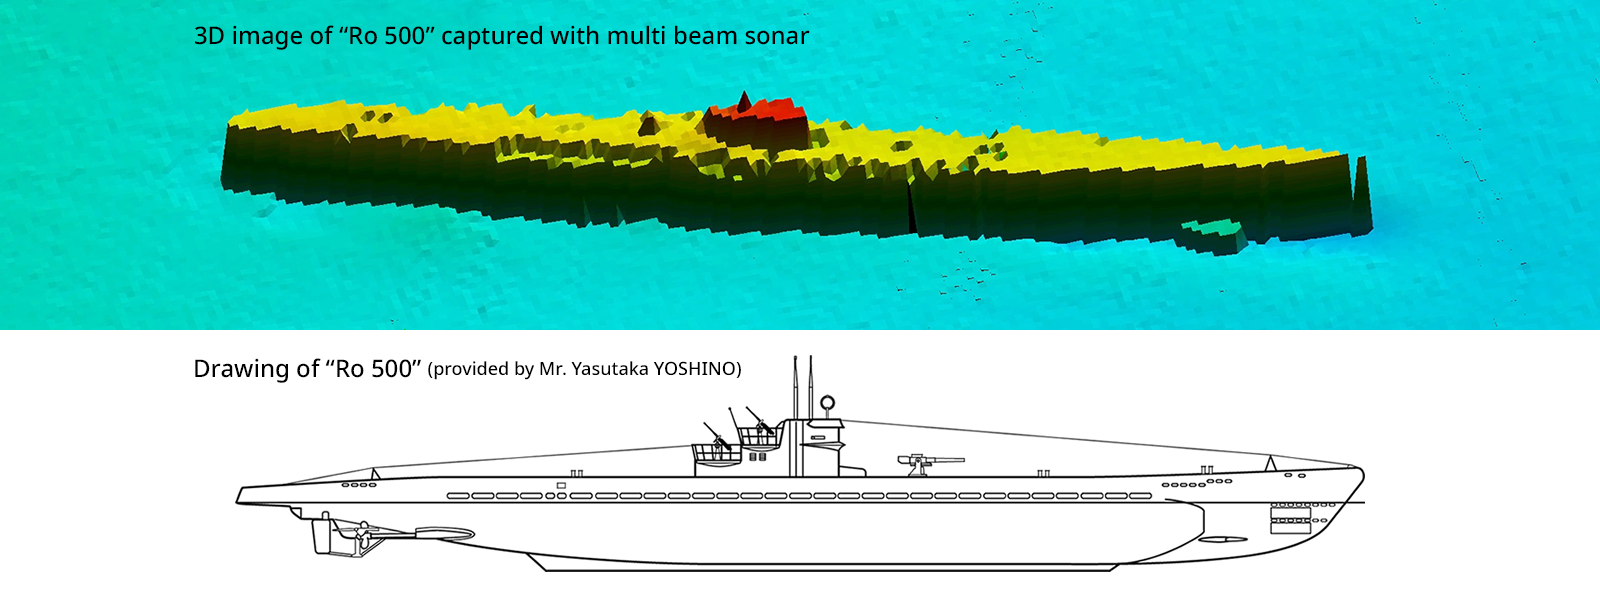 Discovery of submarine “Ro 500” lying on the seabed in Wakasa Bay